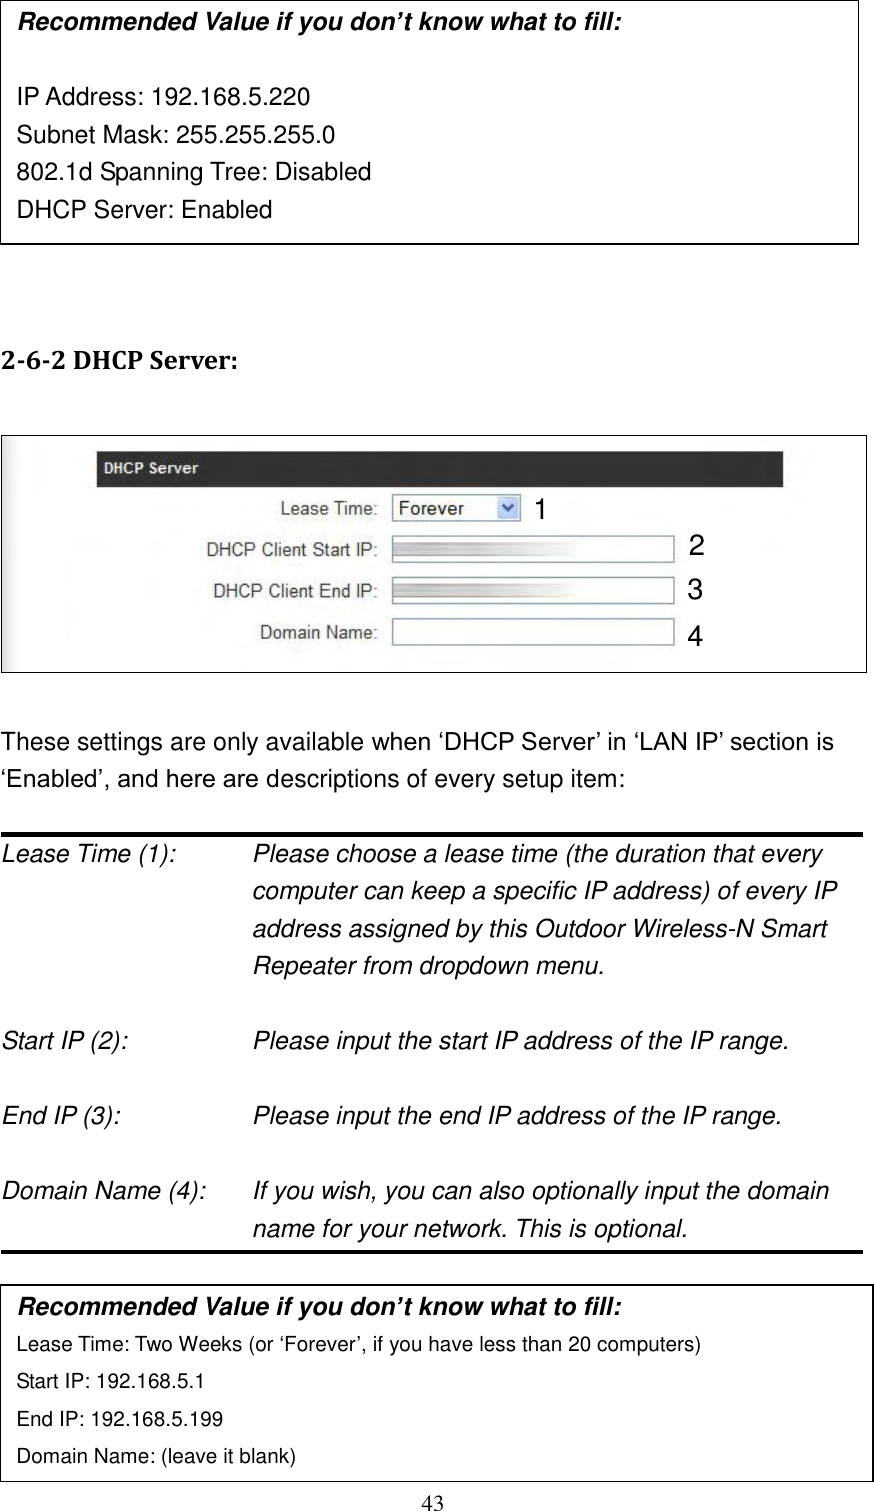 43         2-6-2 DHCP Server:    These settings are only available when „DHCP Server‟ in „LAN IP‟ section is „Enabled‟, and here are descriptions of every setup item:  Lease Time (1):    Please choose a lease time (the duration that every computer can keep a specific IP address) of every IP address assigned by this Outdoor Wireless-N Smart Repeater from dropdown menu.  Start IP (2):        Please input the start IP address of the IP range.  End IP (3):        Please input the end IP address of the IP range.  Domain Name (4):    If you wish, you can also optionally input the domain name for your network. This is optional.       Recommended Value if you don’t know what to fill: Lease Time: Two Weeks (or „Forever‟, if you have less than 20 computers) Start IP: 192.168.5.1 End IP: 192.168.5.199 Domain Name: (leave it blank) 1 3 4 2 Recommended Value if you don’t know what to fill:  IP Address: 192.168.5.220 Subnet Mask: 255.255.255.0 802.1d Spanning Tree: Disabled DHCP Server: Enabled 